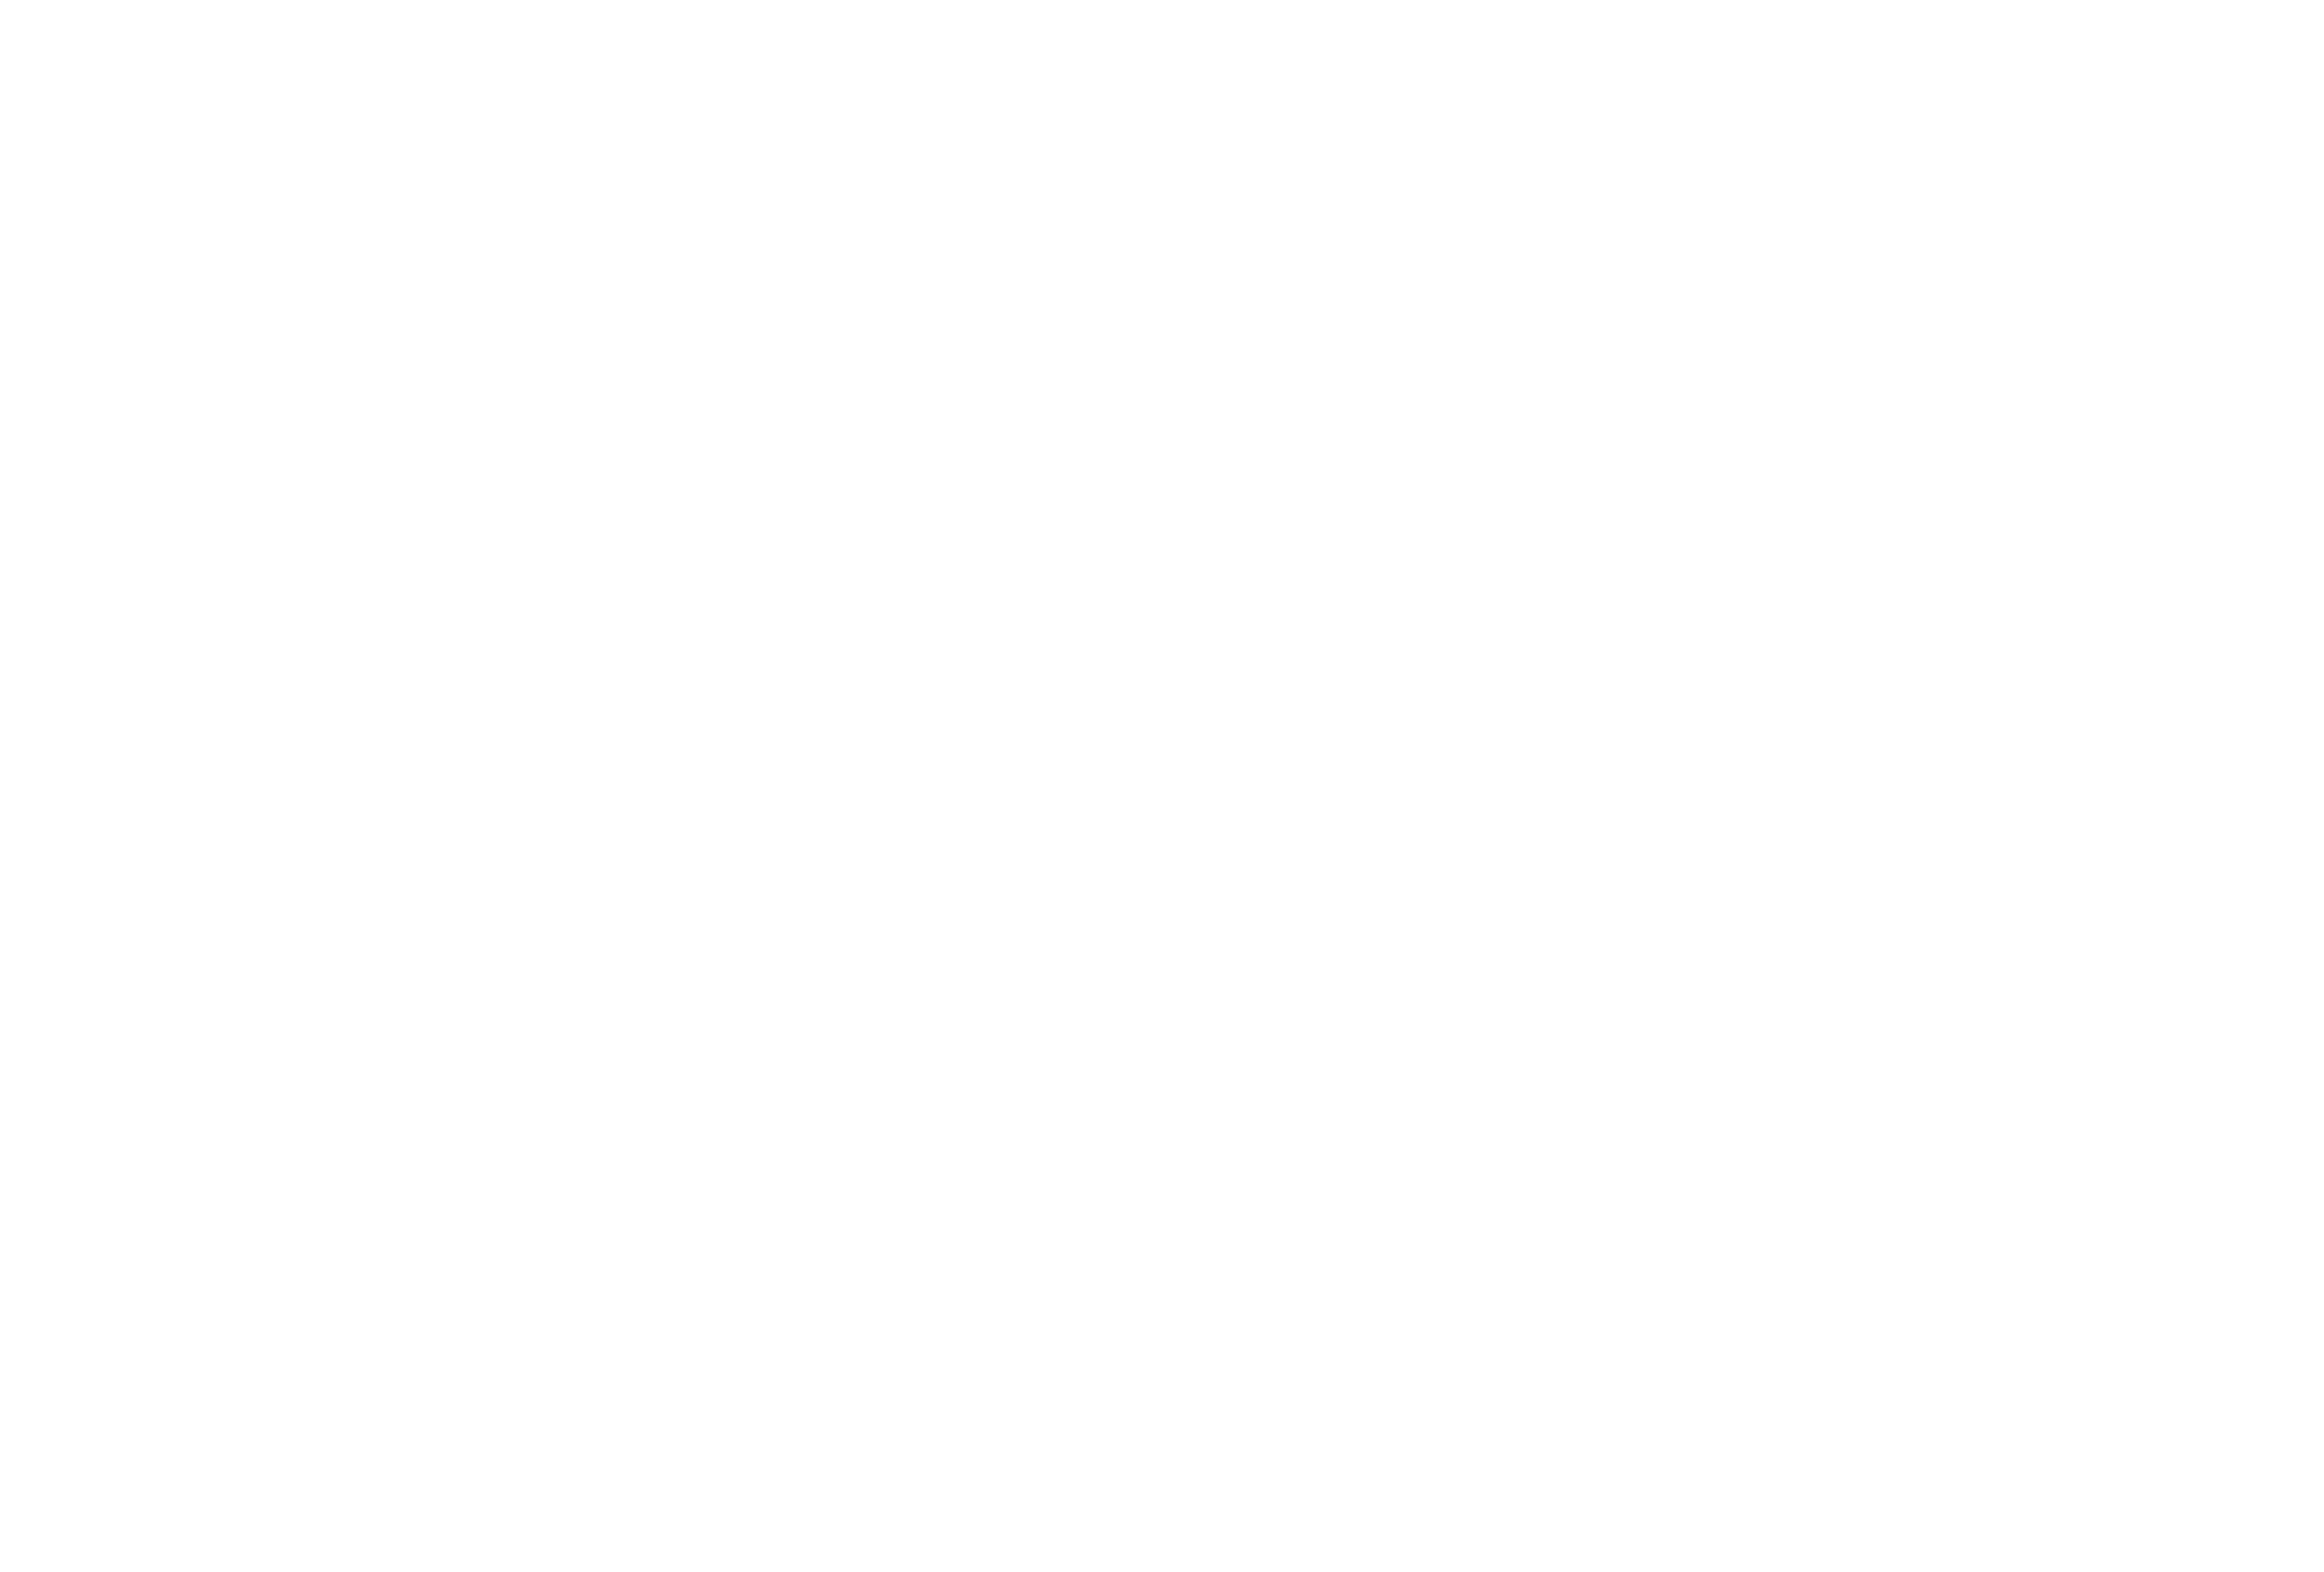 Adept Signs | Custom Printed Graphics, Trade Show Displays, Stickers, Decals, Banners and More